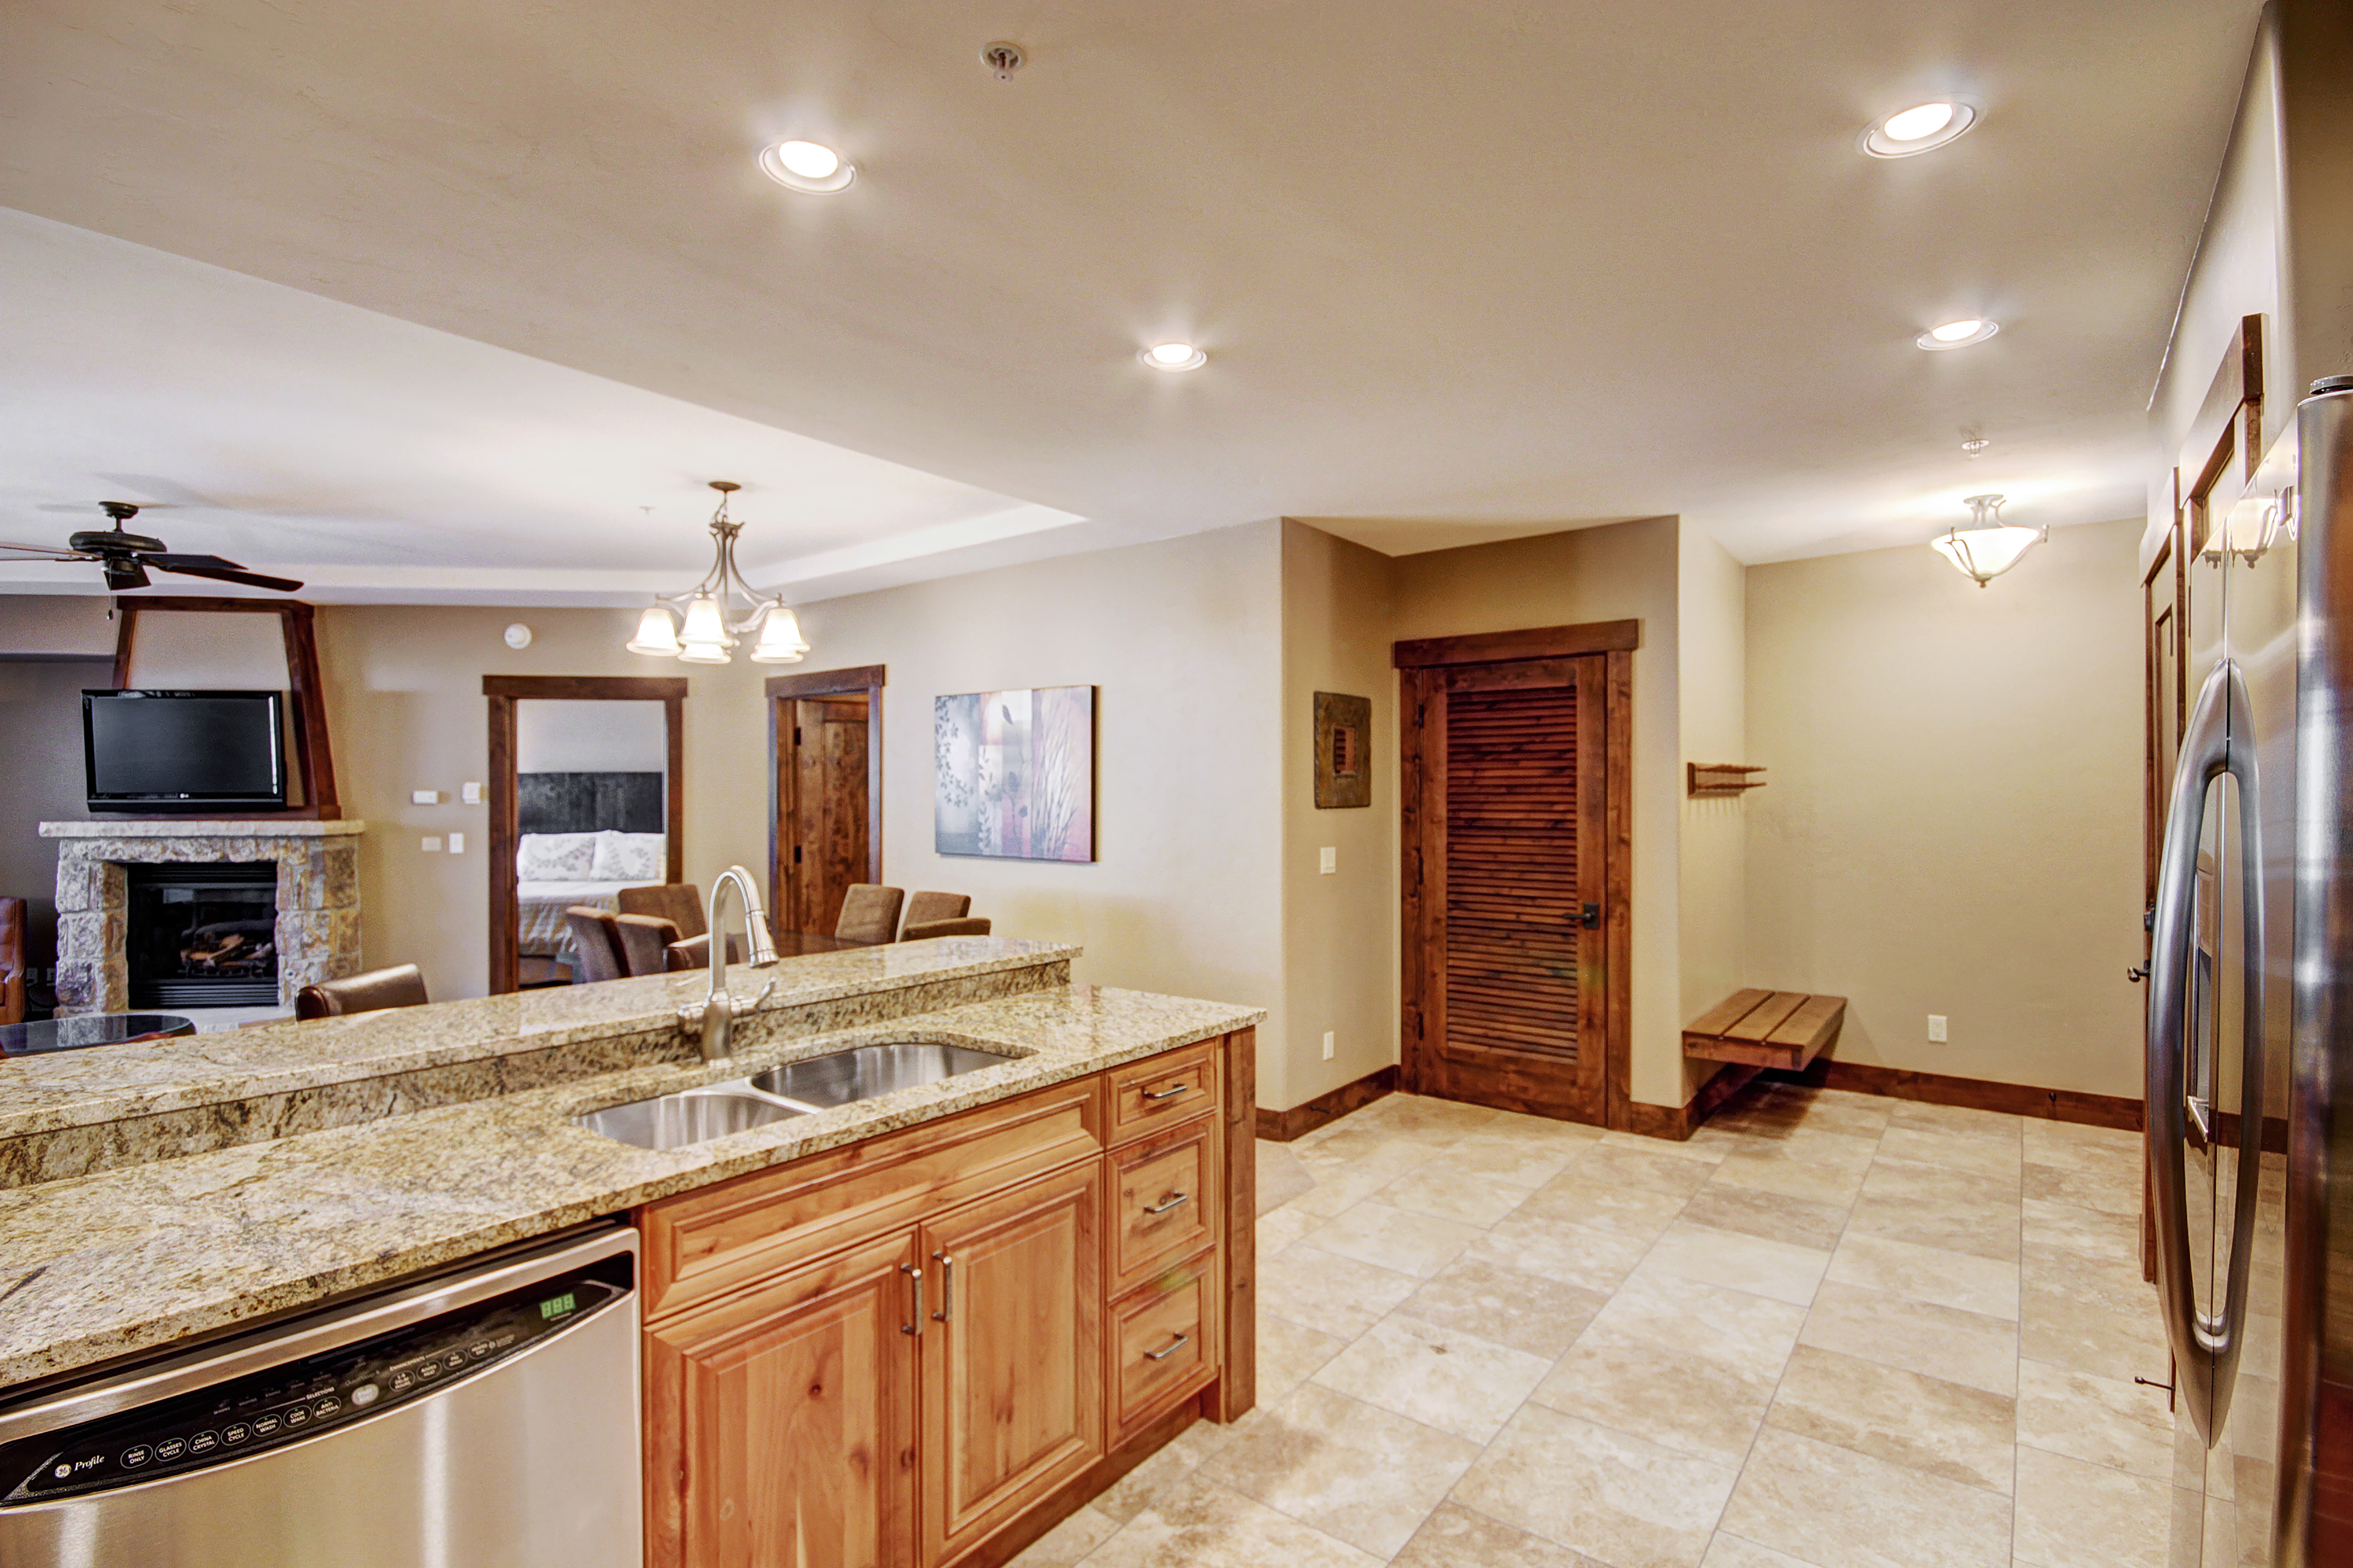 Cooks will delight in the stainless appliances and polished granite countertops.